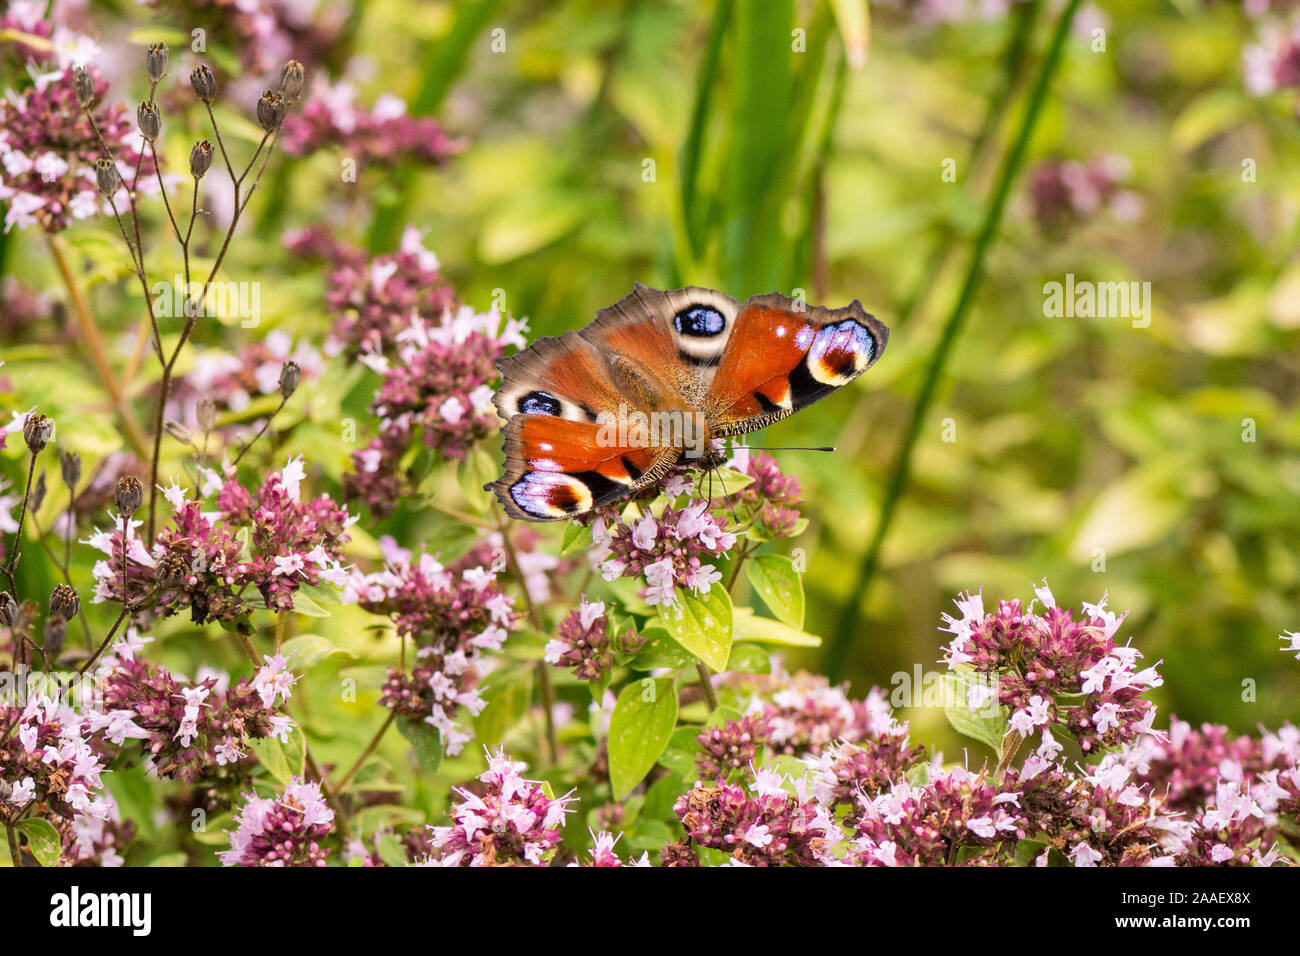 A peacock butterfly nectaring on thyme flowers Stock Photo